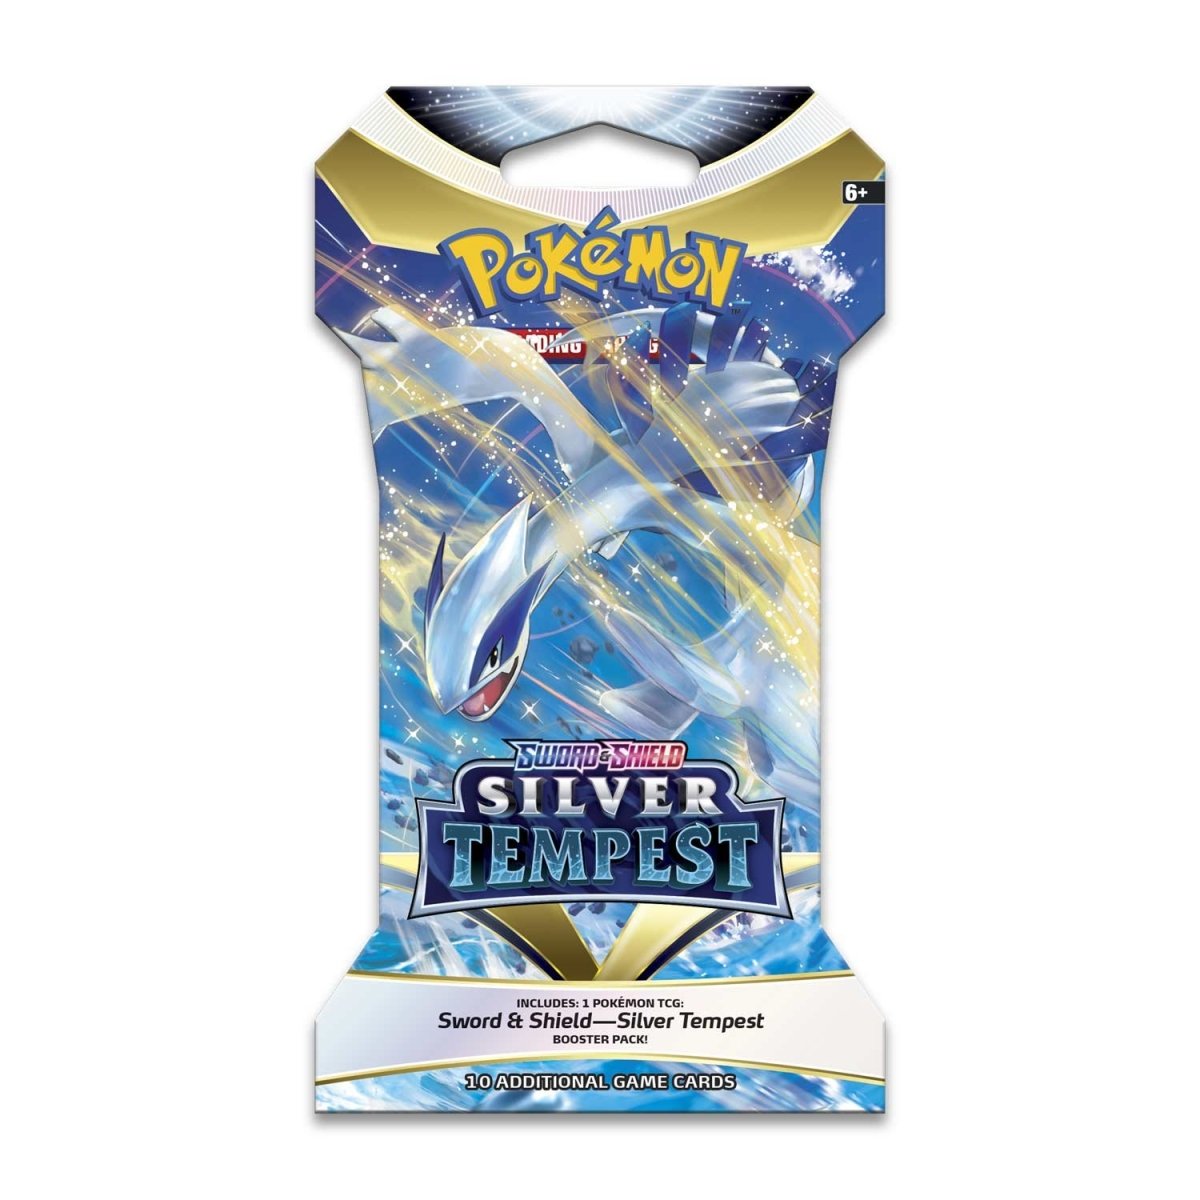 Pokémon Sword & Shield 12: Silver Tempest Sleeved Booster Pack